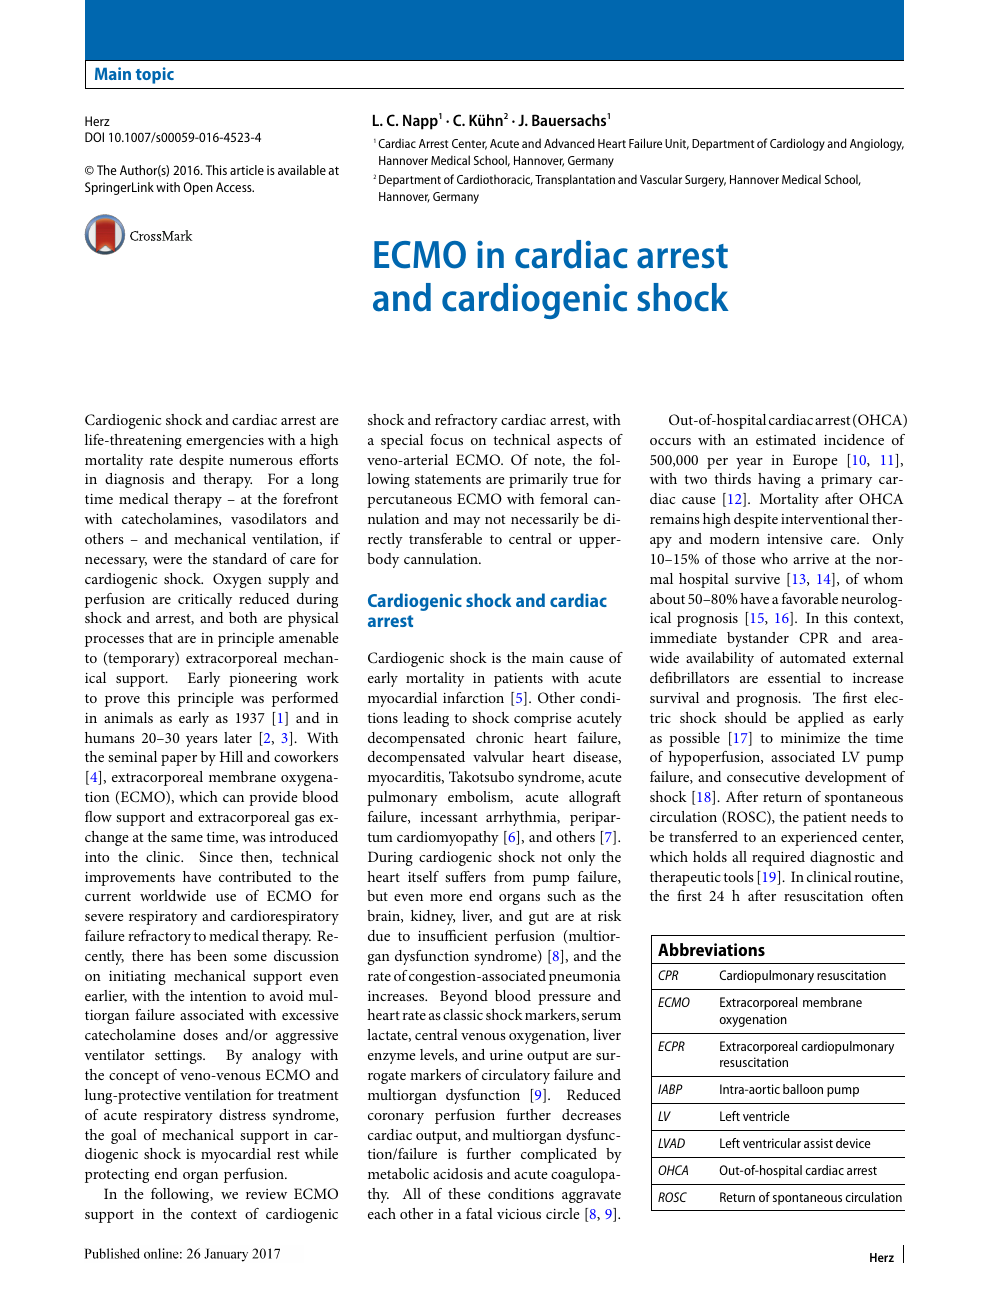 Ecmo In Cardiac Arrest And Cardiogenic Shock Topic Of Research Paper In Clinical Medicine Download Scholarly Article Pdf And Read For Free On Cyberleninka Open Science Hub